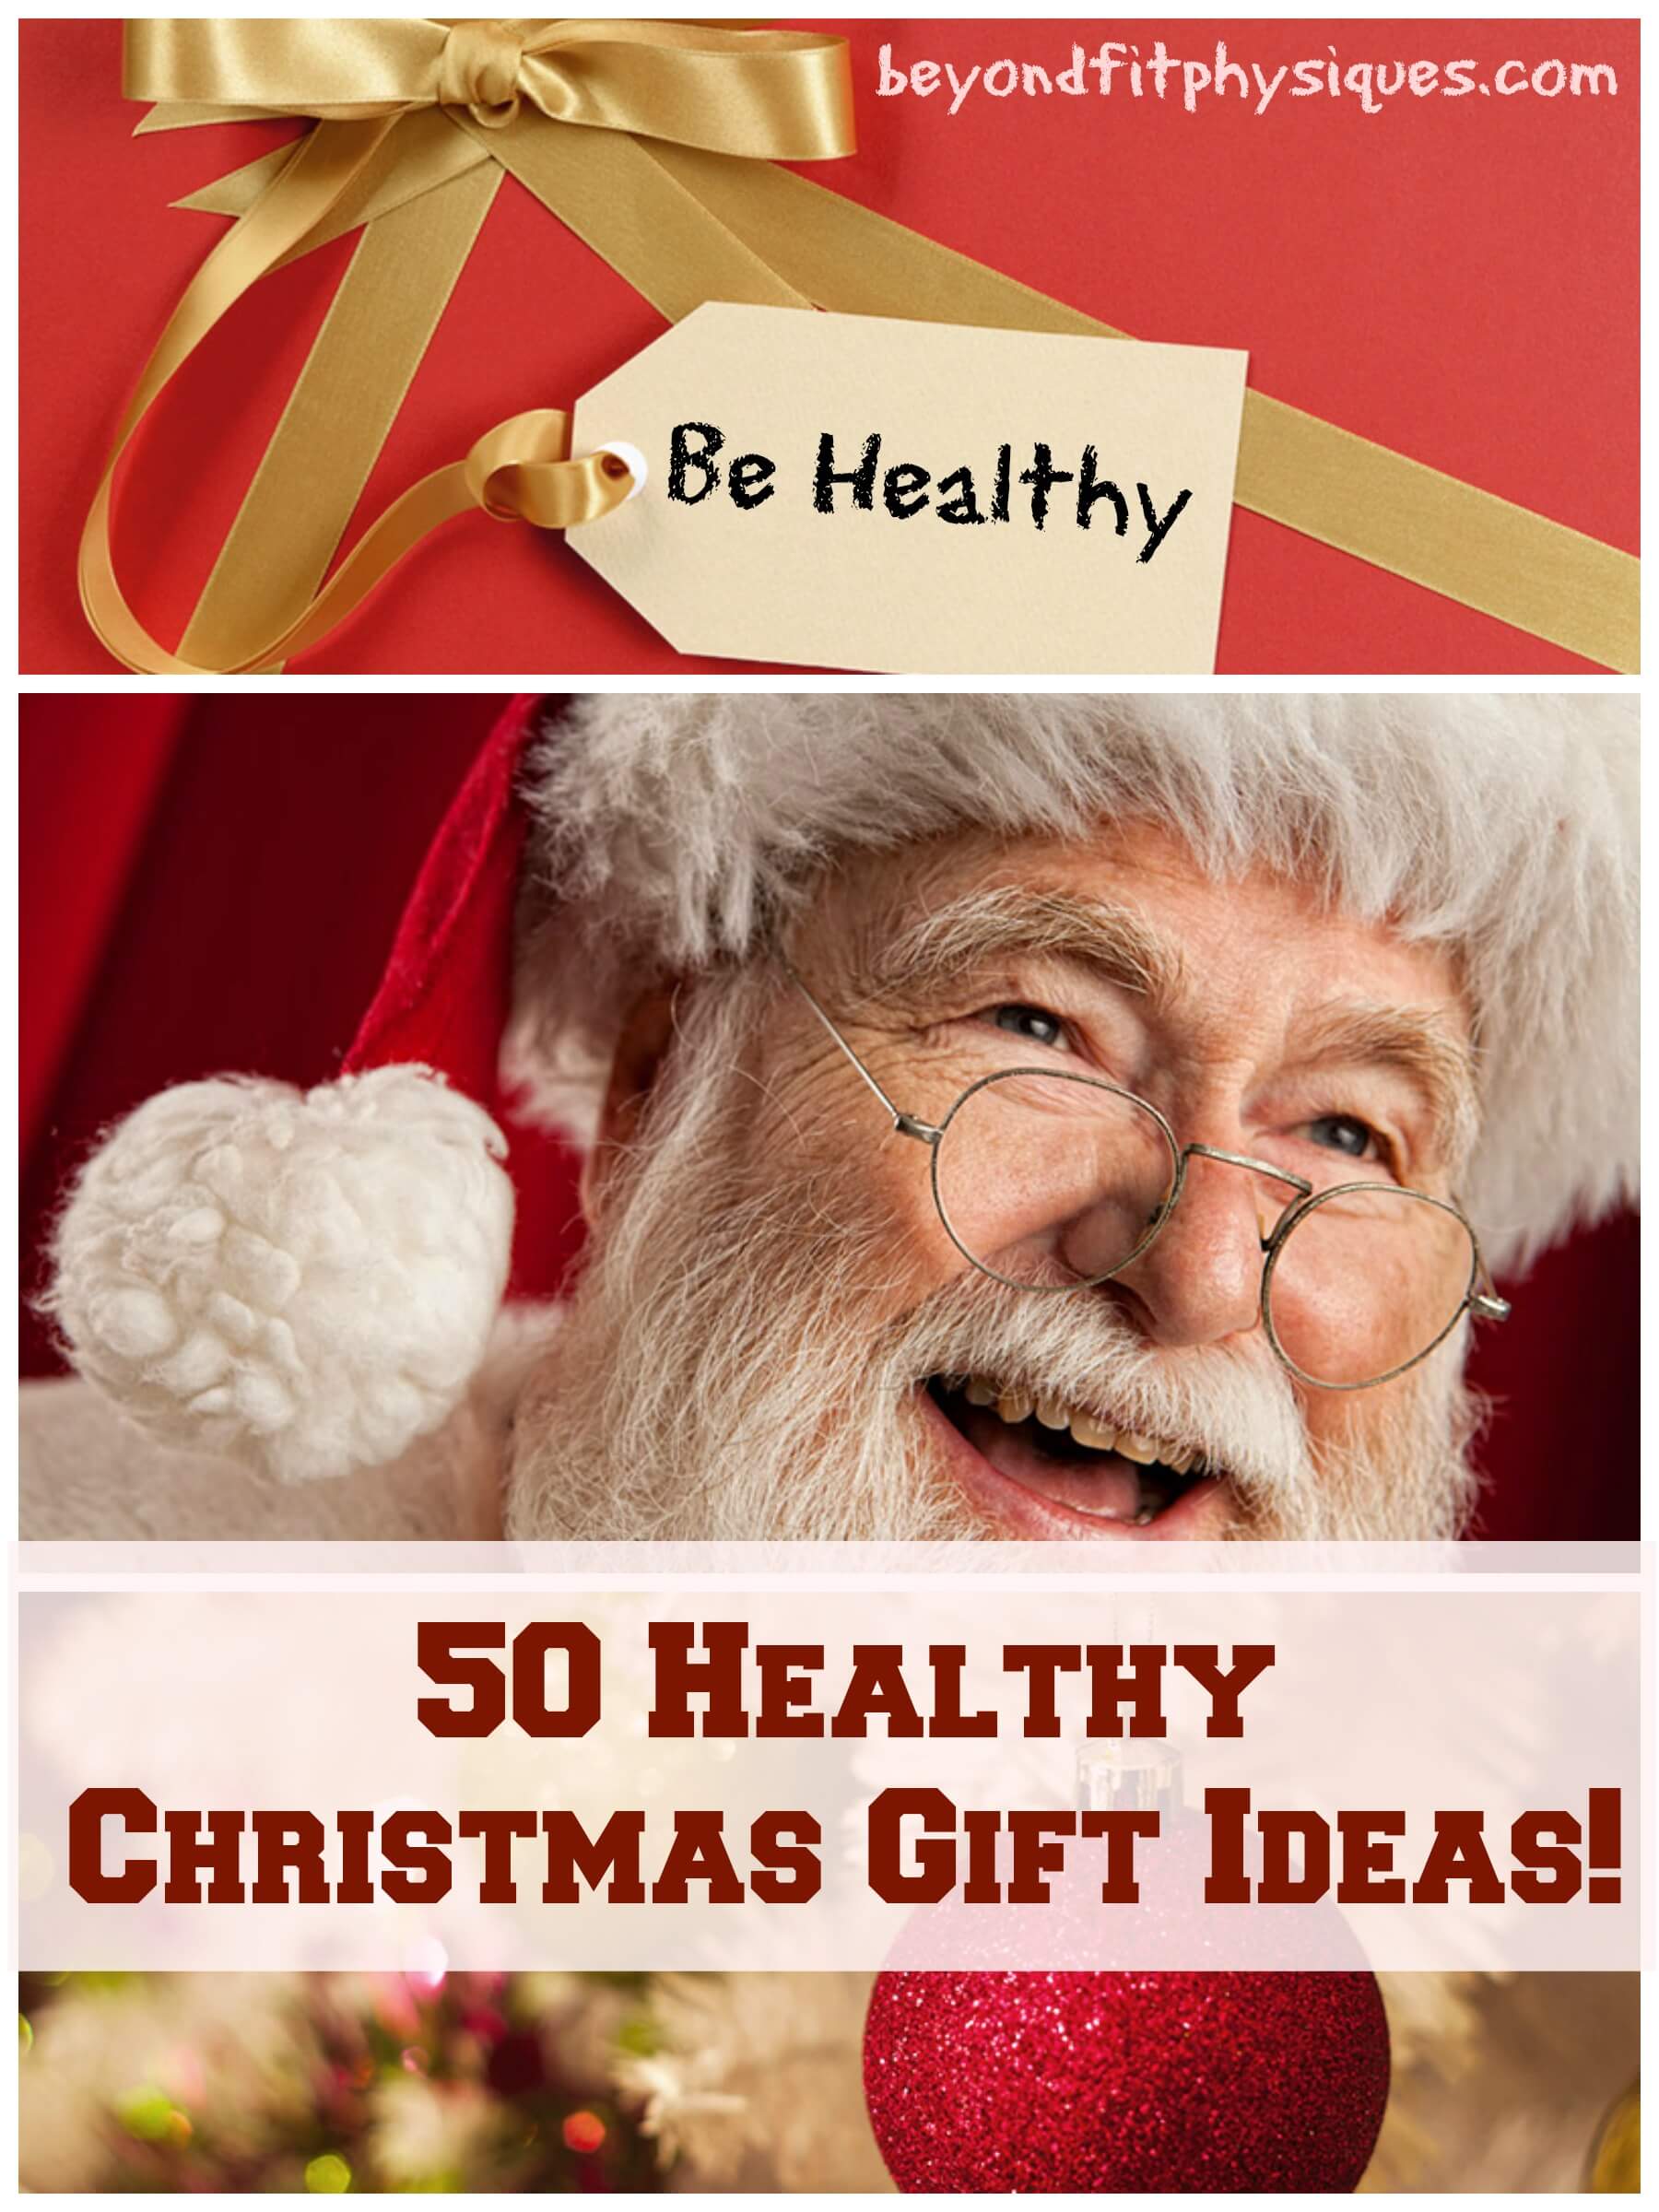 50healthygifts